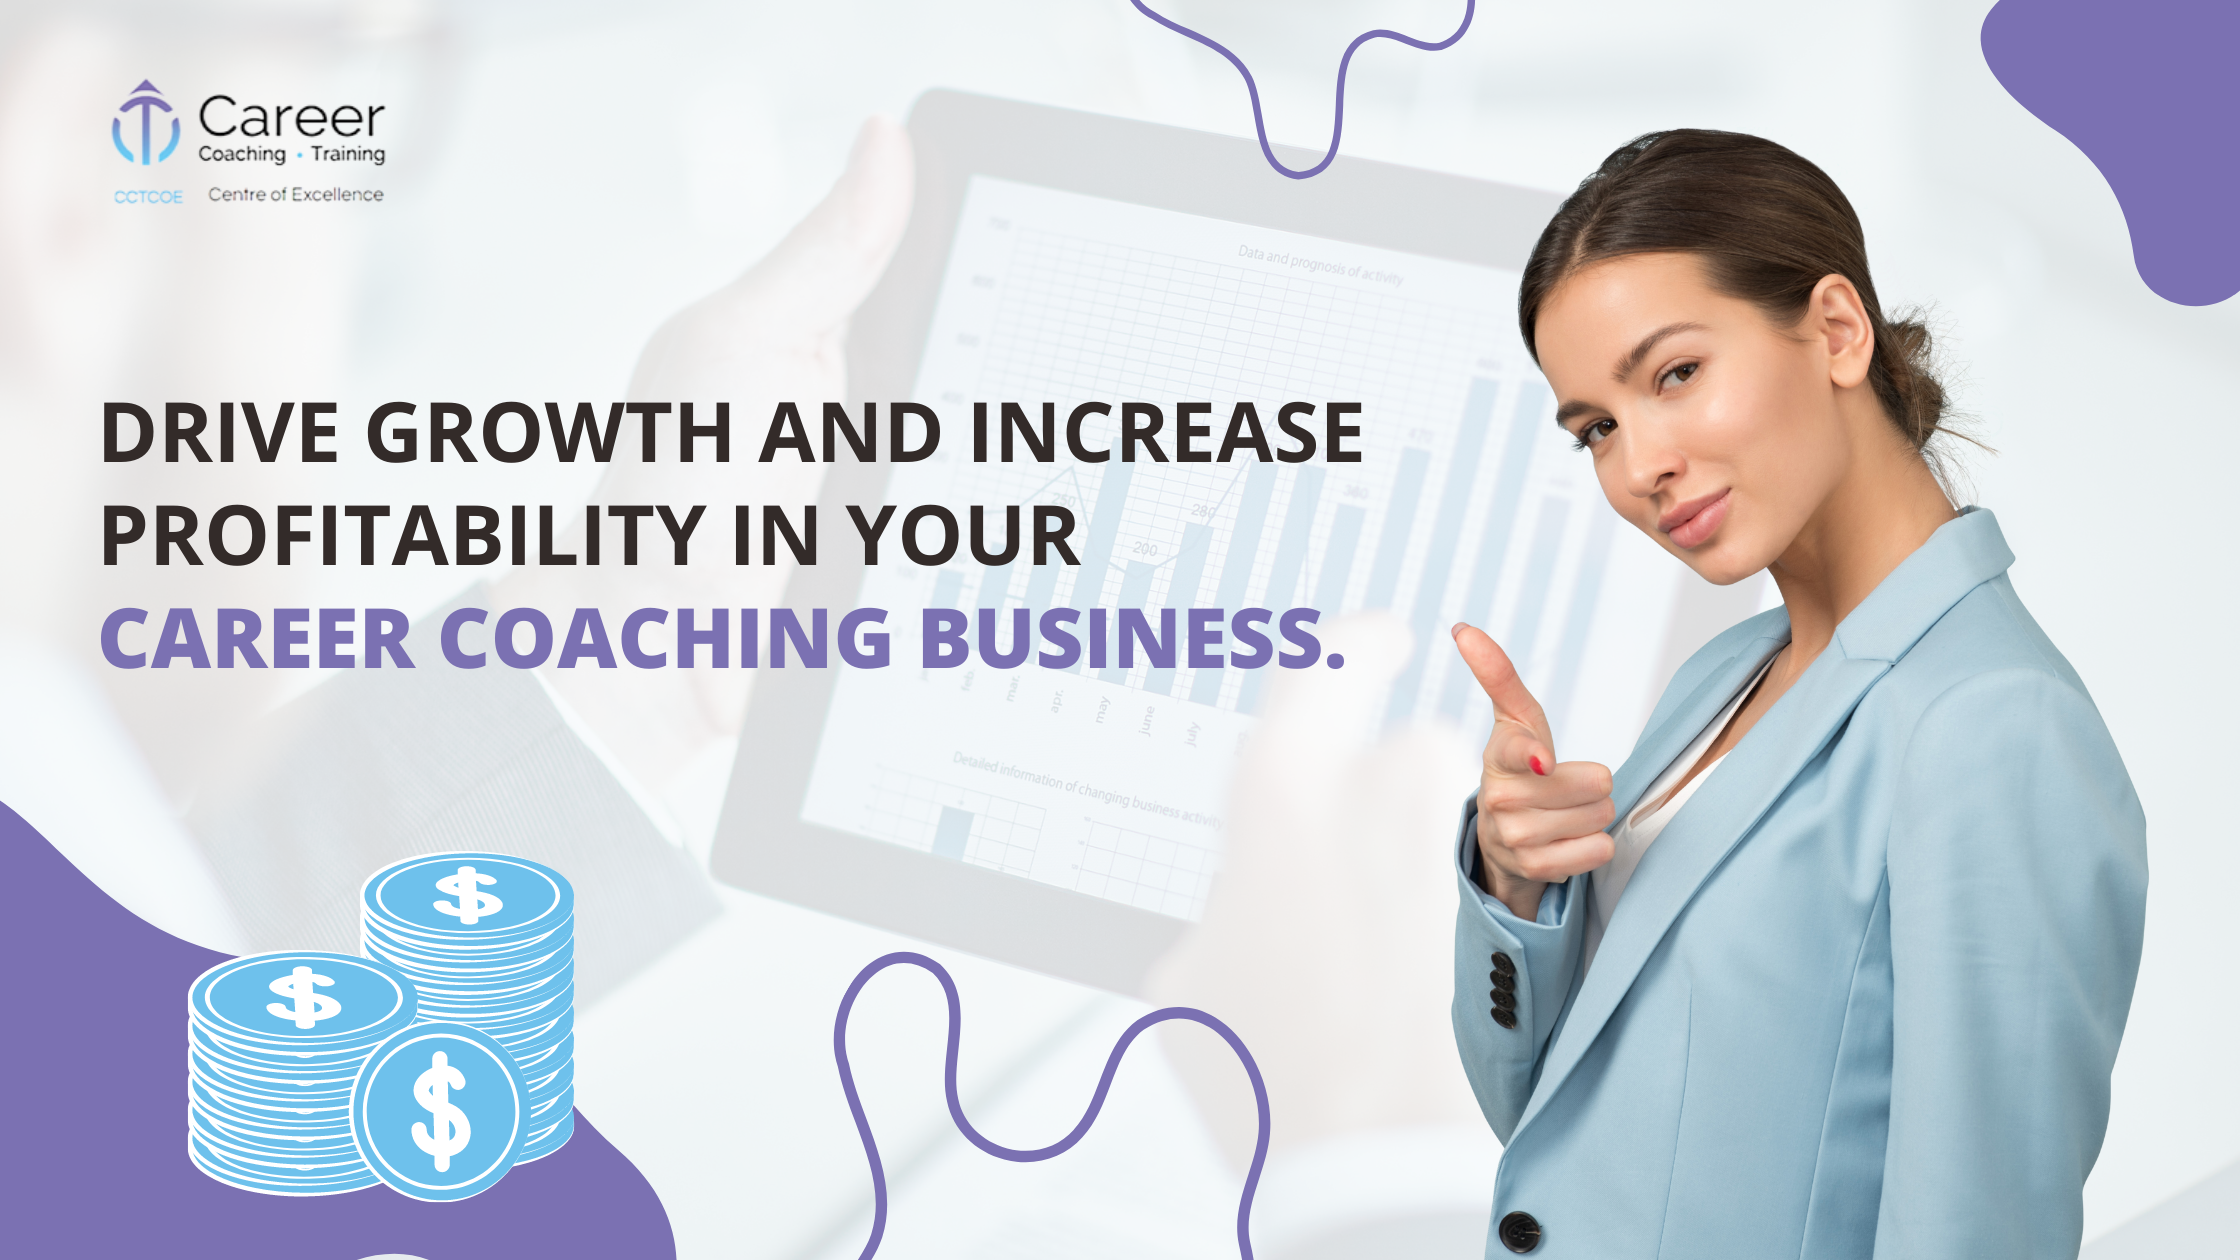 Drive growth and increase profitability in your Career Coaching Business.